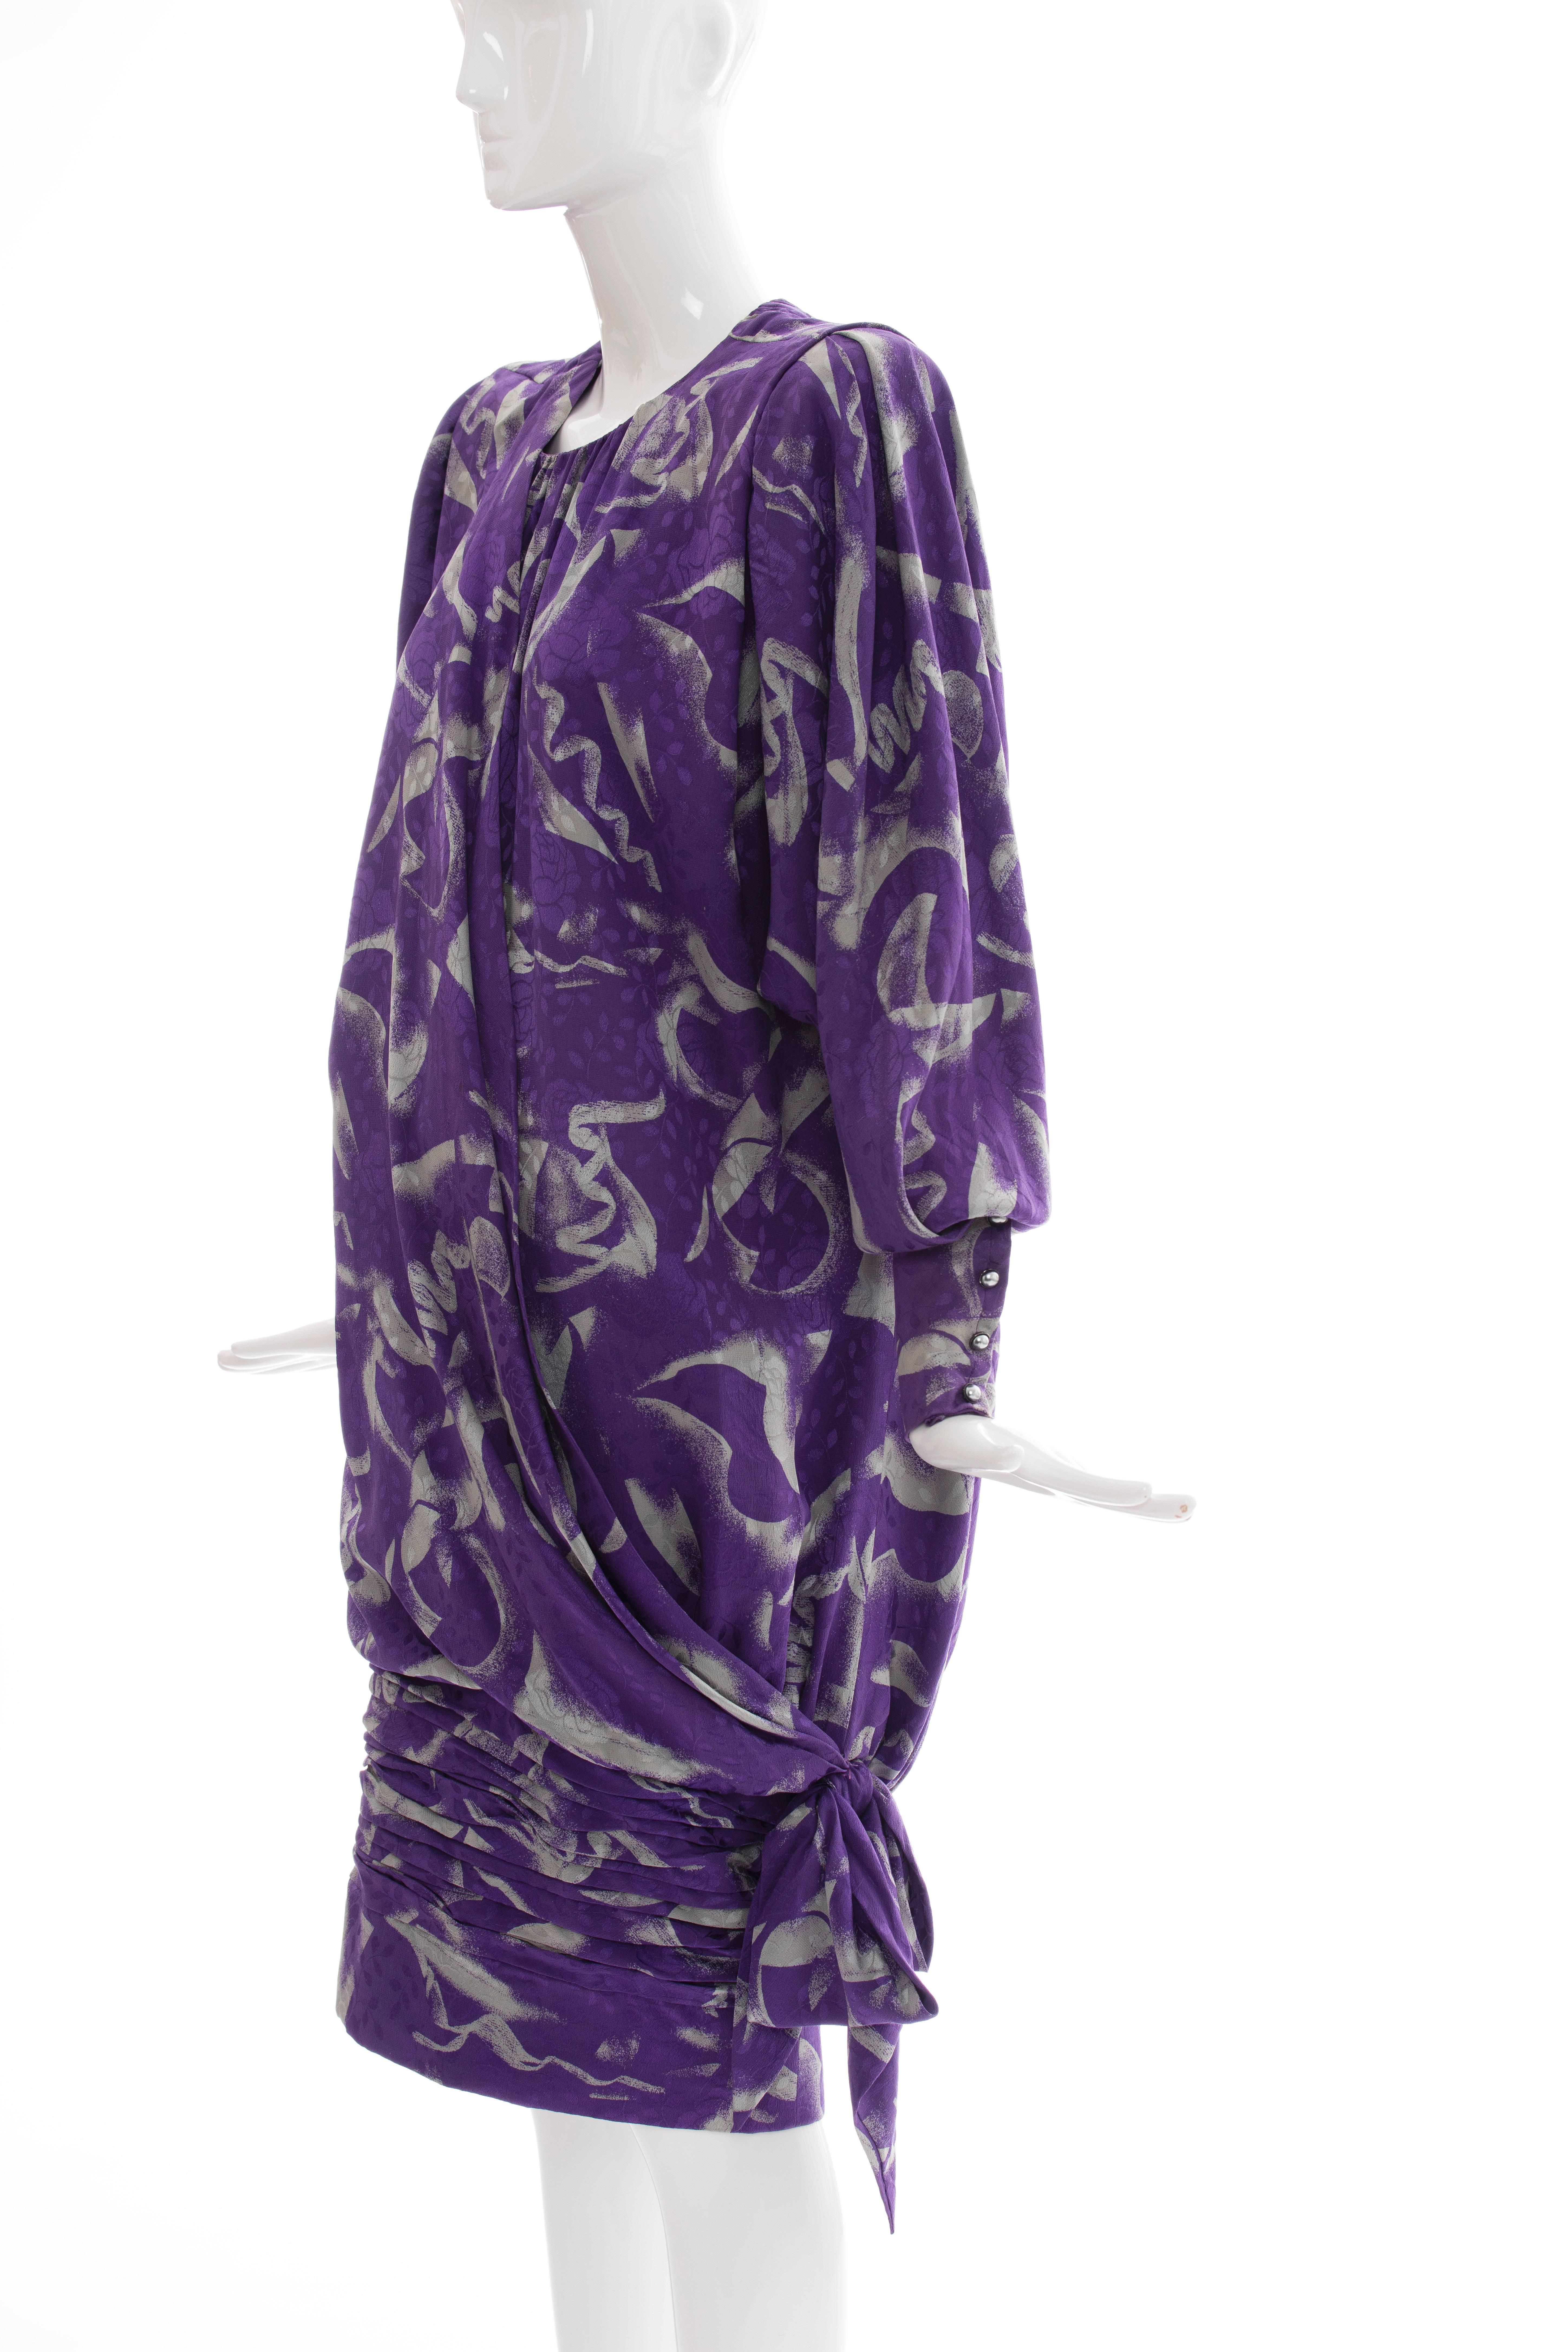 Emanuel Ungaro Runway Haute Couture Balloon Collection Dress Fall, Circa: 1980's For Sale 1